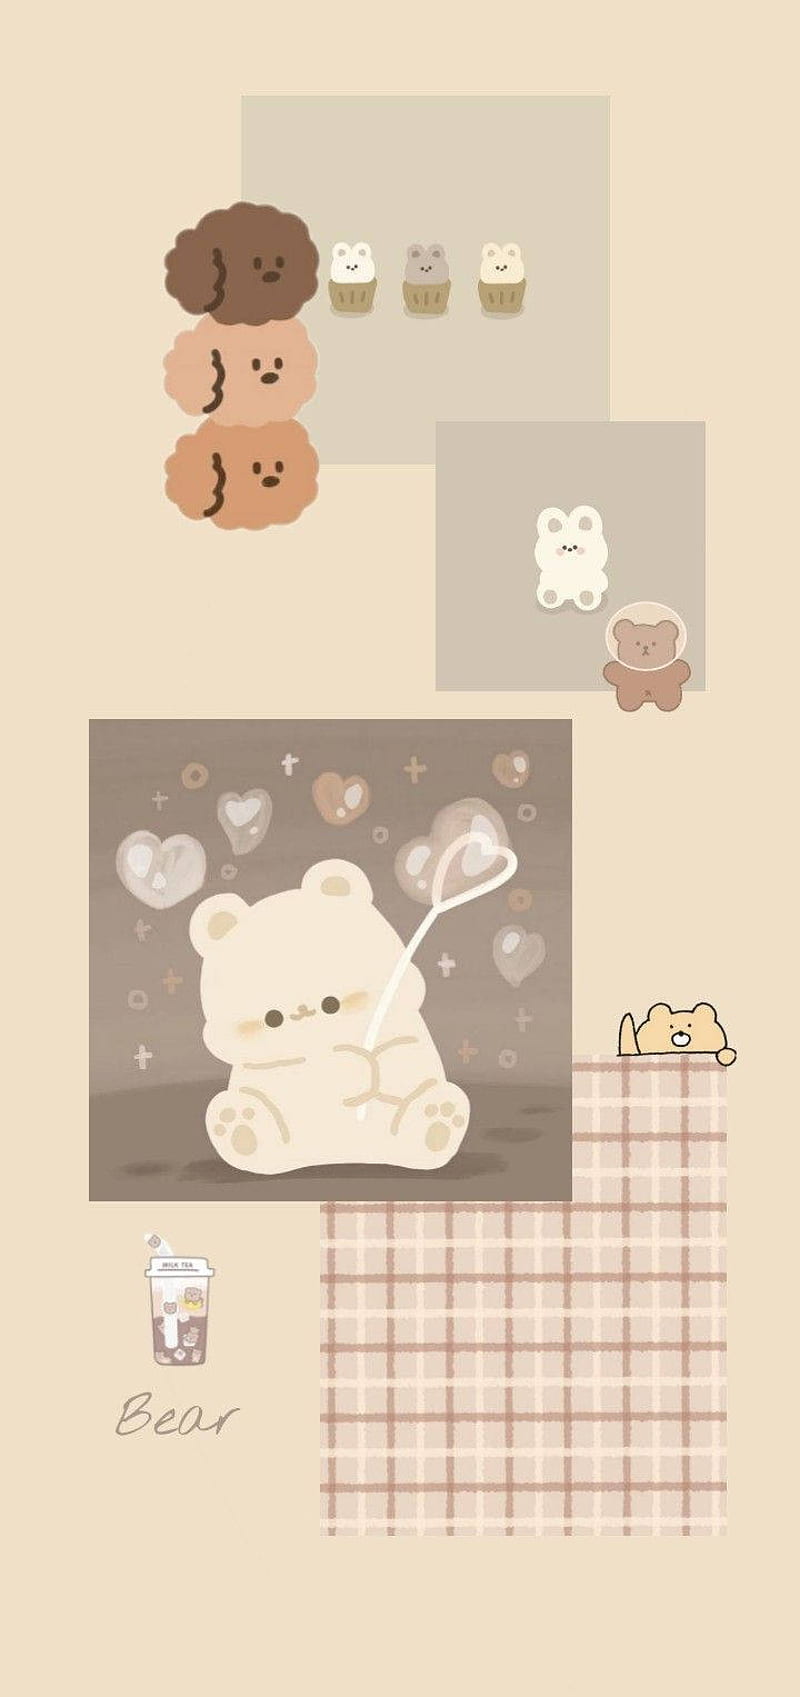 A bear and some other items on the wall - Beige, teddy bear, kawaii